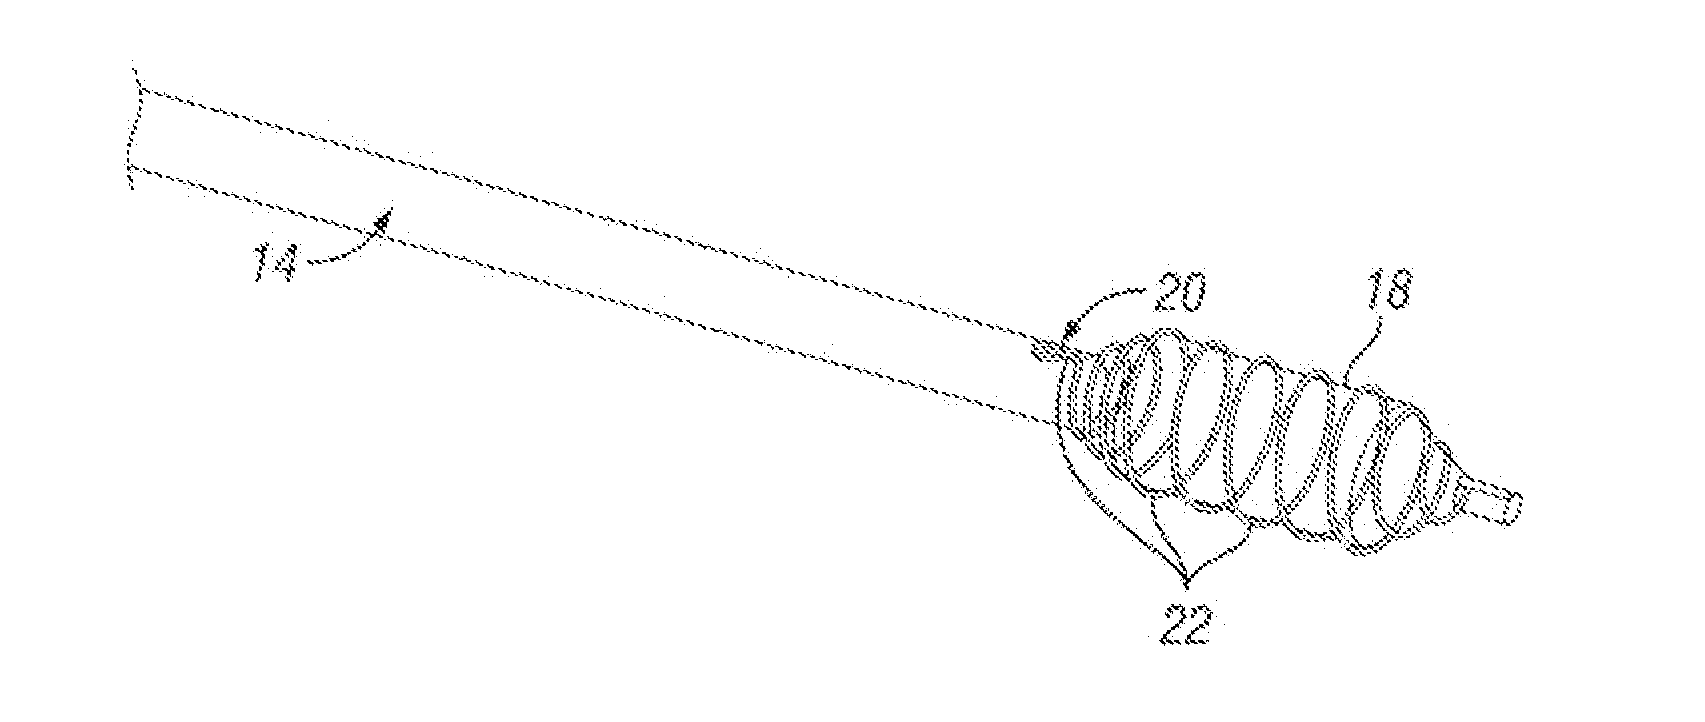 Angioplasty balloon having selectively deployable cutting or scoring element and related methods